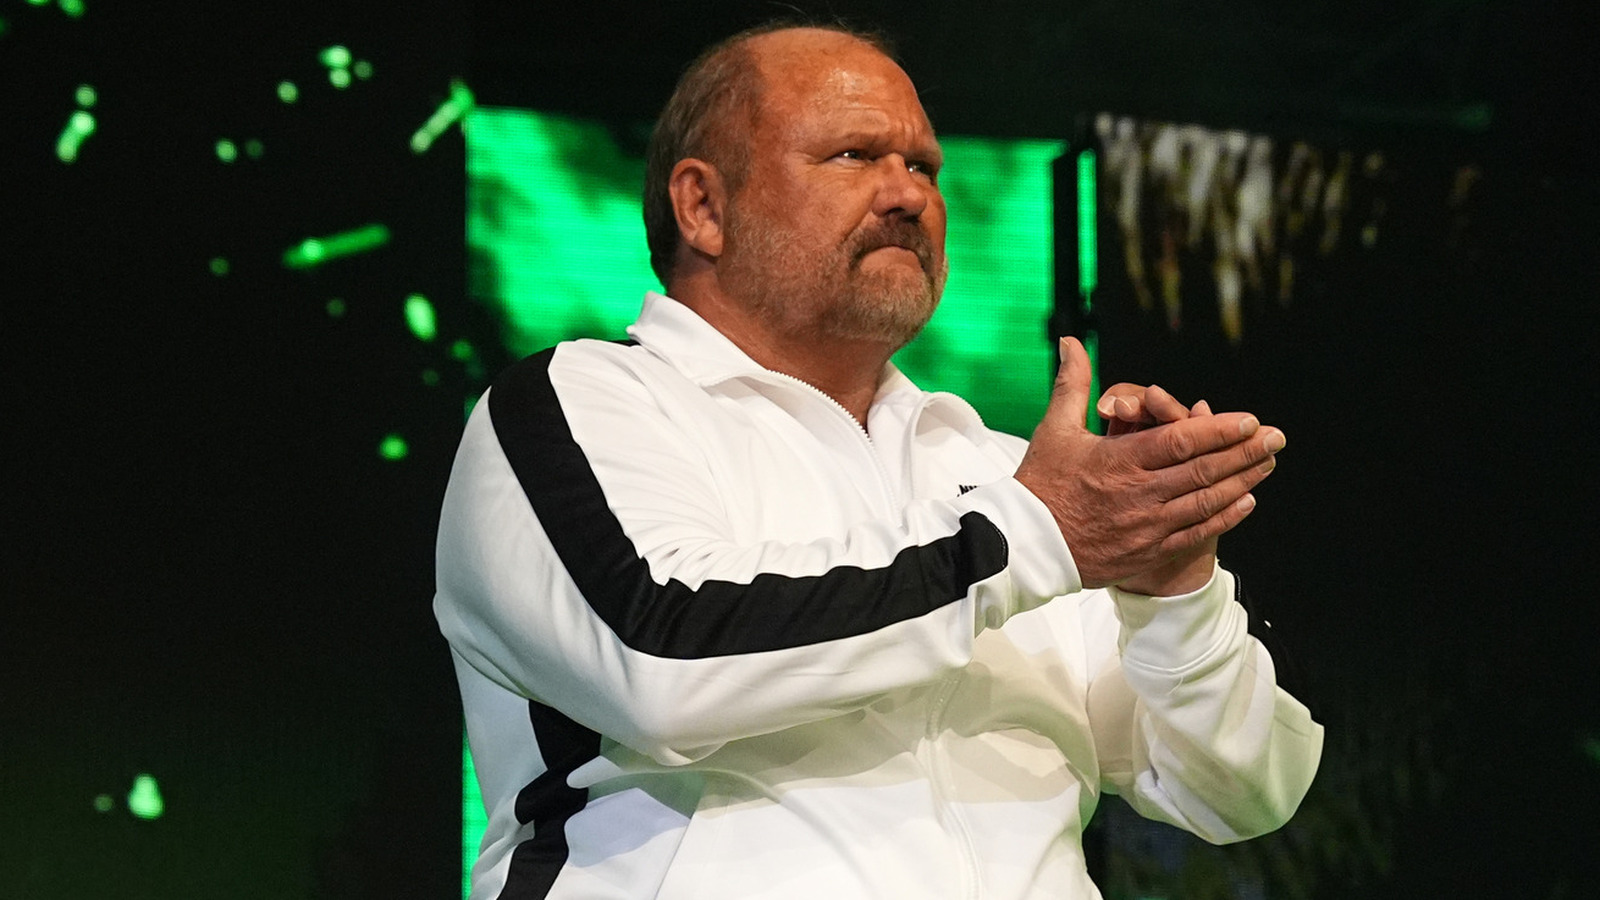 Arn Anderson Has Seen Cody Rhodes' WWE Documentary, Says Tony Khan Is Happy For Him